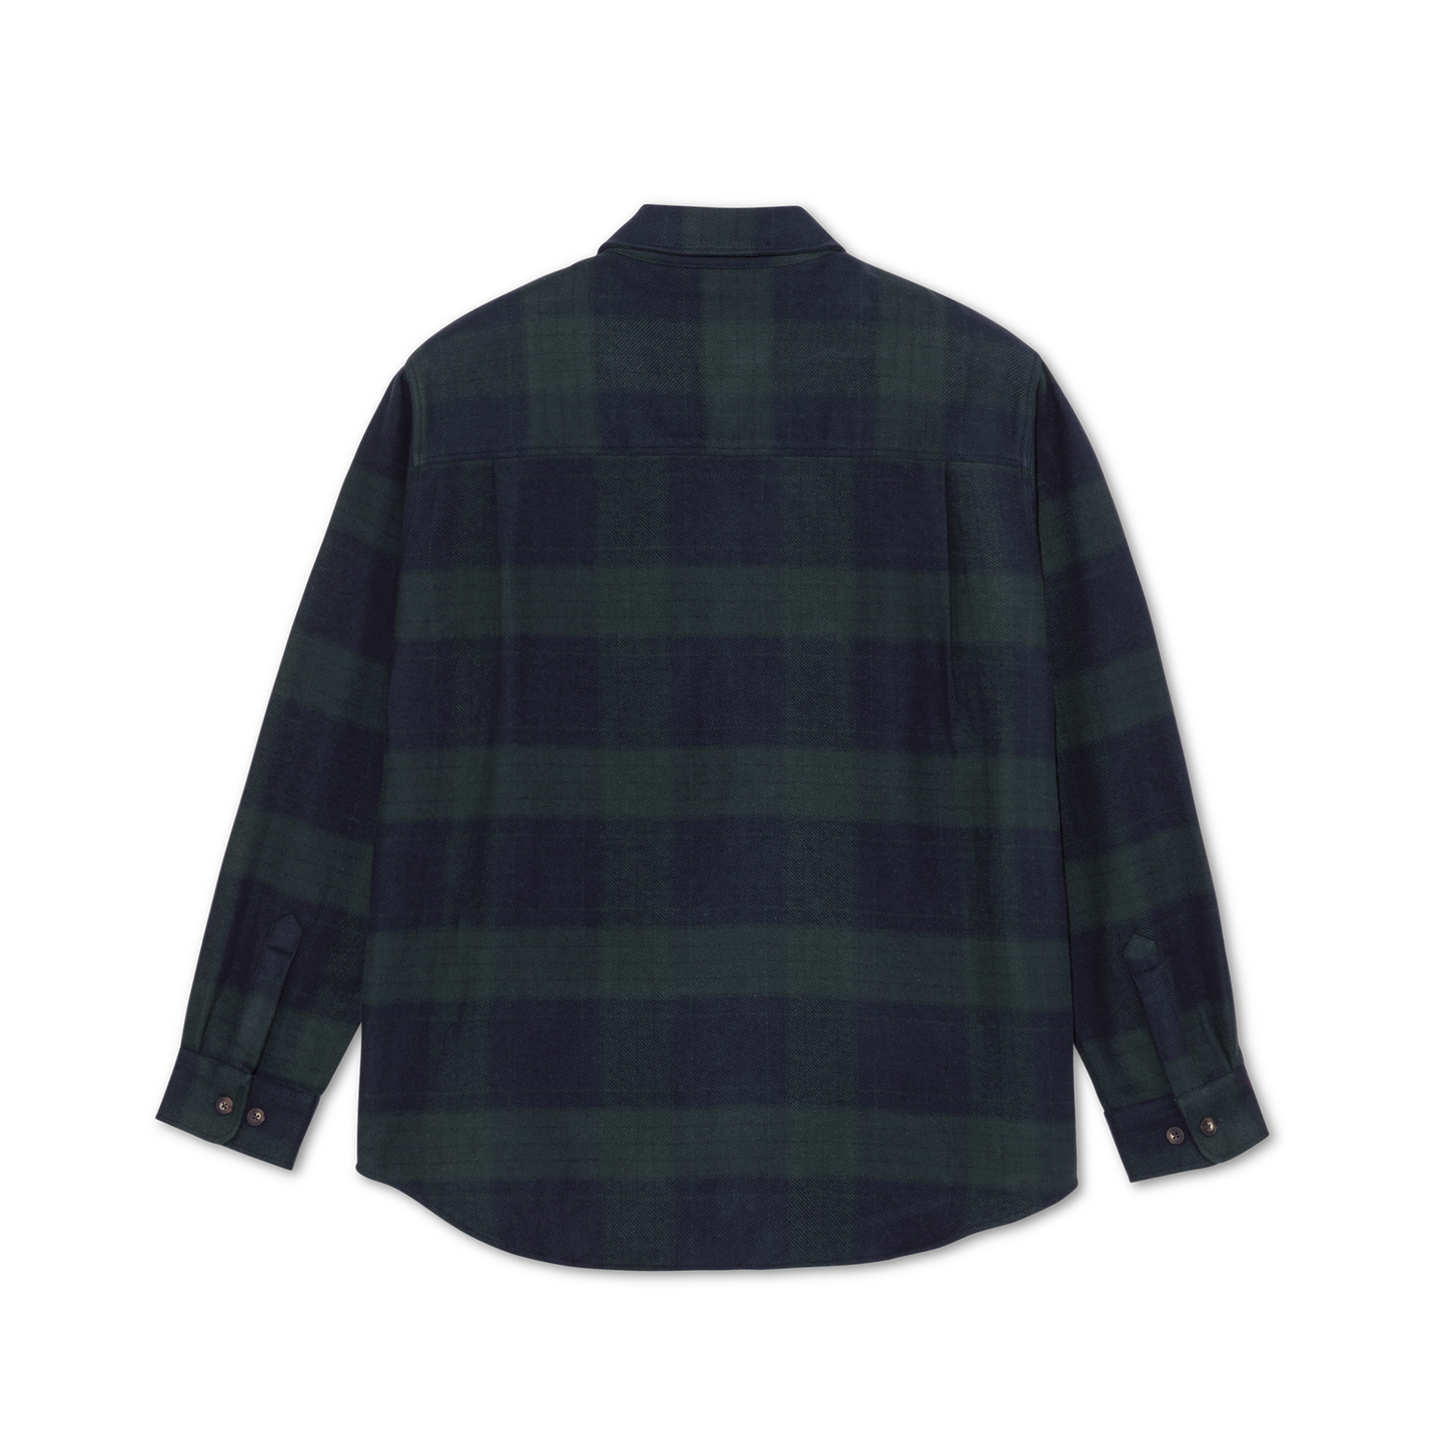 Mike L/S Shirt Flannel, Navy